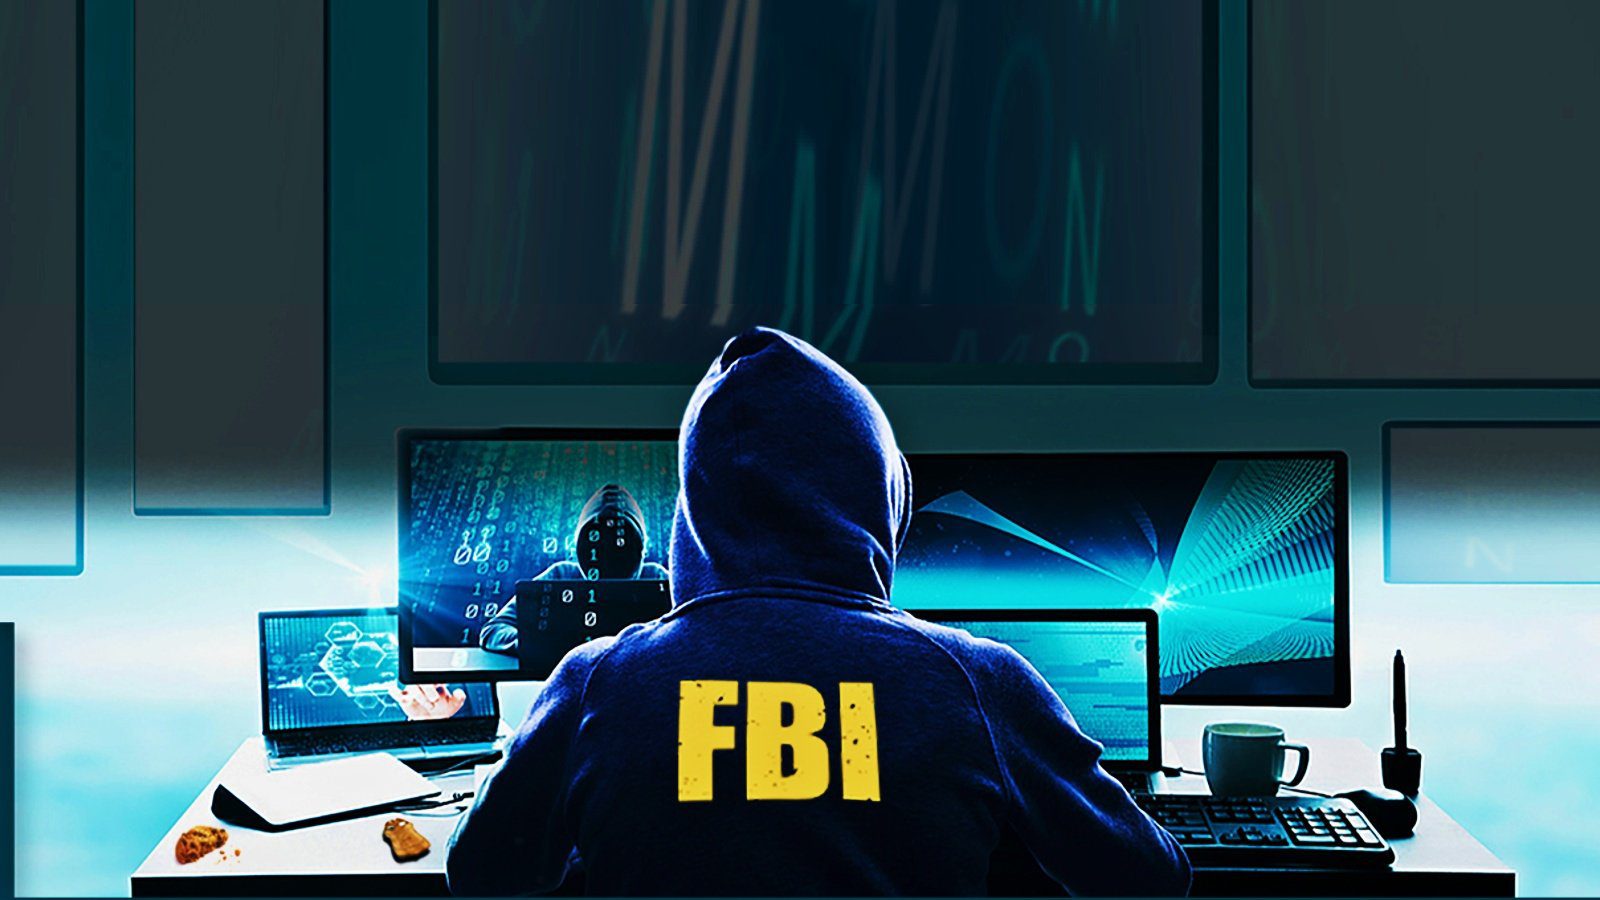 FBI seizes 13 more domains linked to DDoS-for-hire services – Source: www.bleepingcomputer.com